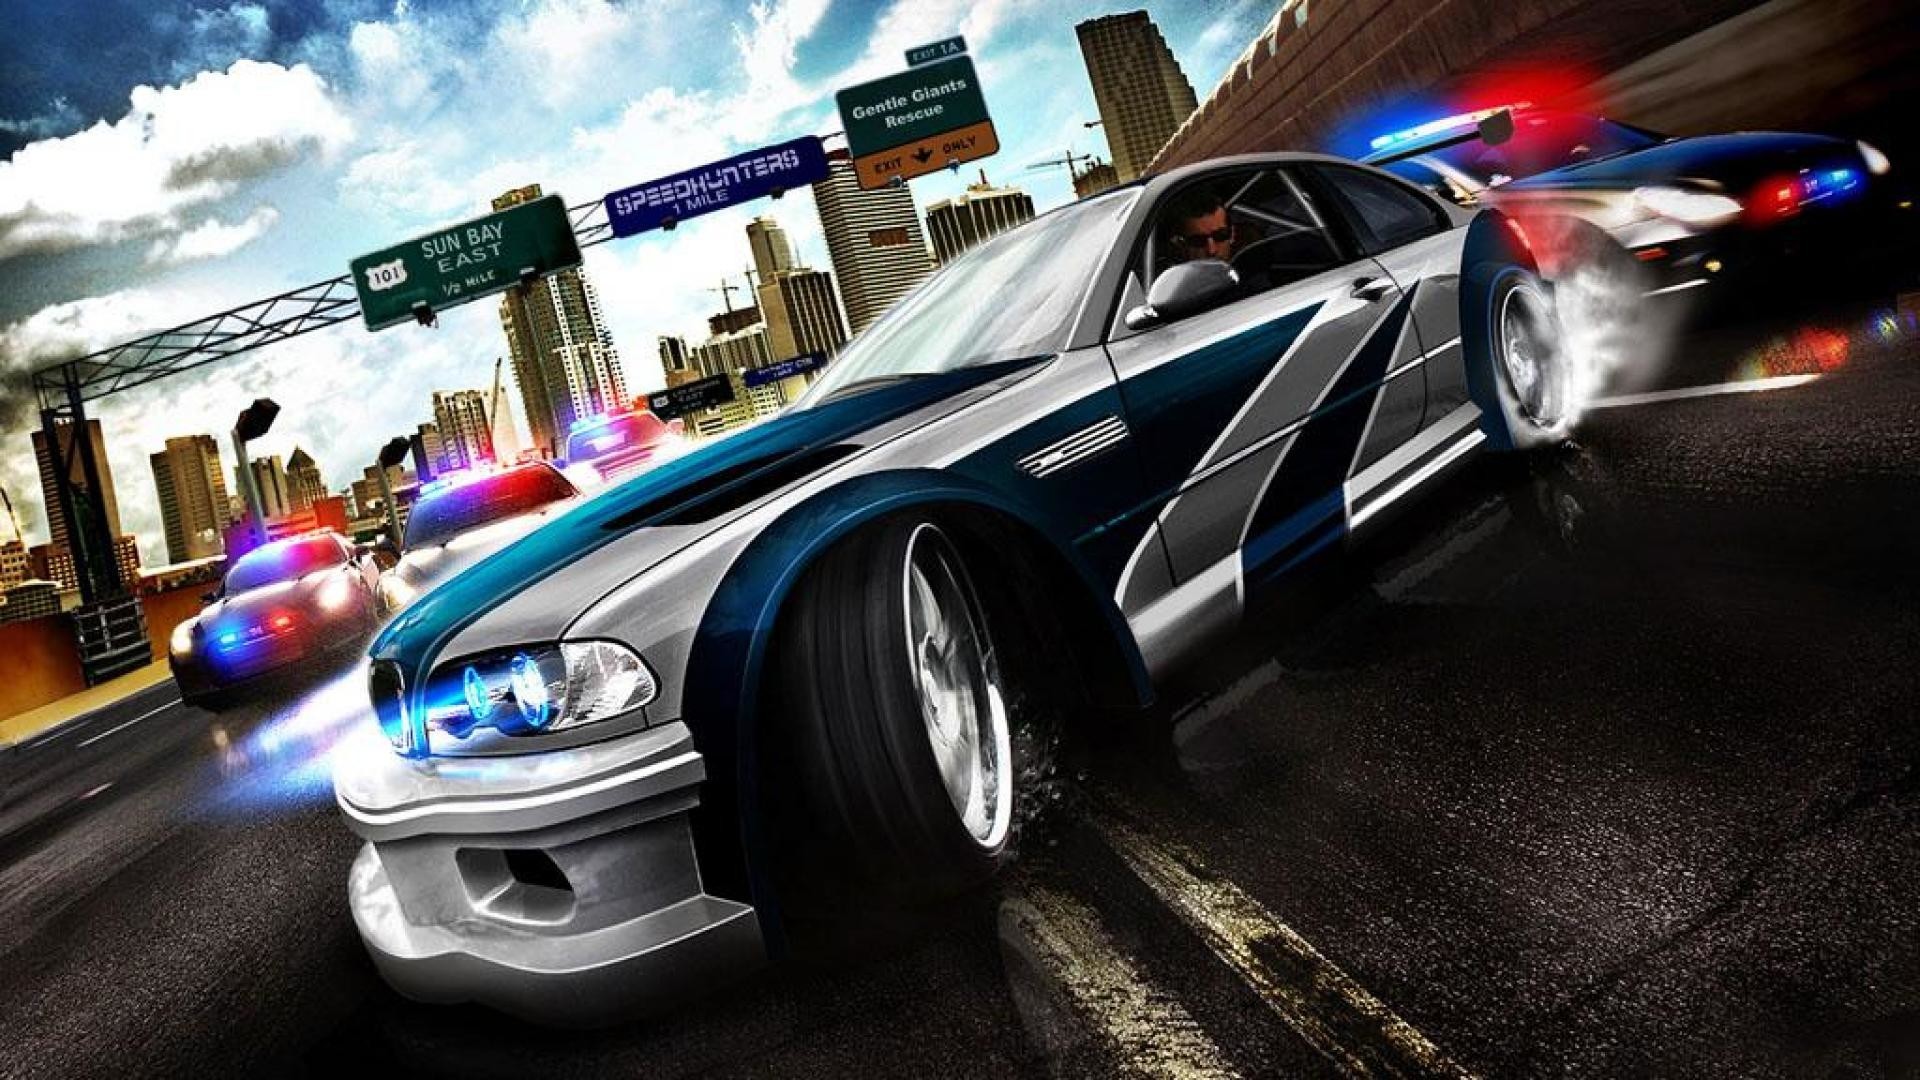 1920x1080  Need For Speed Wallpaper Movie Games 11143 Full HD Wallpaper .